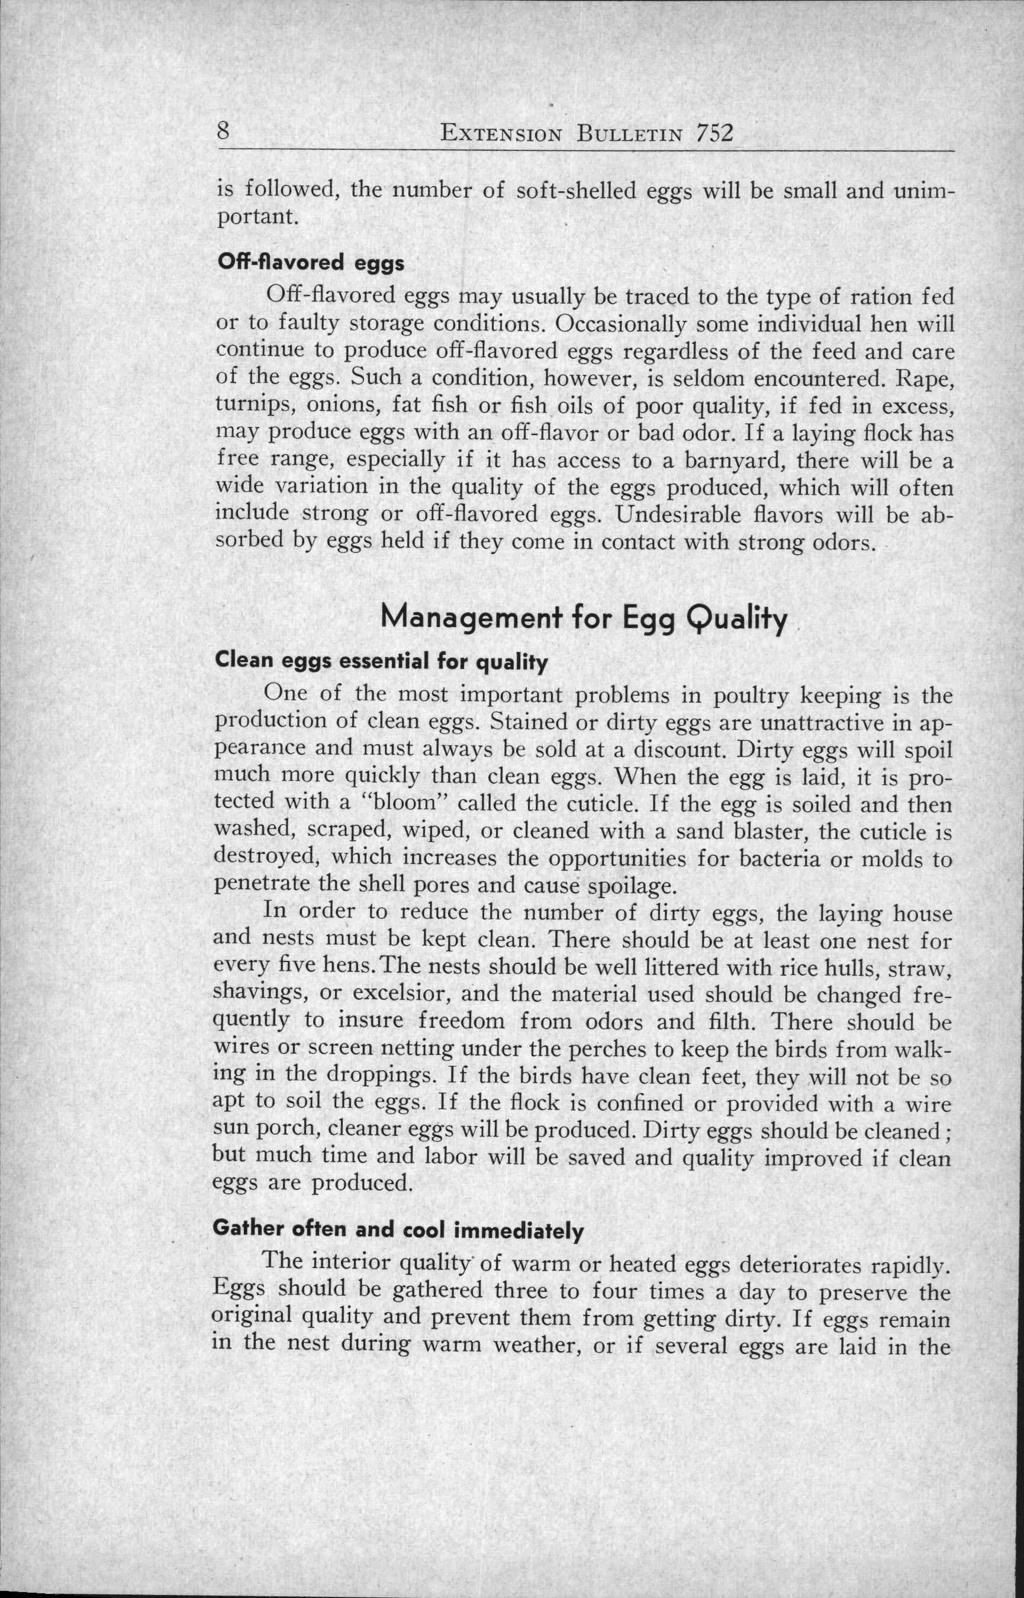 8 EXTENSION BULLETIN 752 is followed, the number of soft-shelled eggs will be small and unimportant.